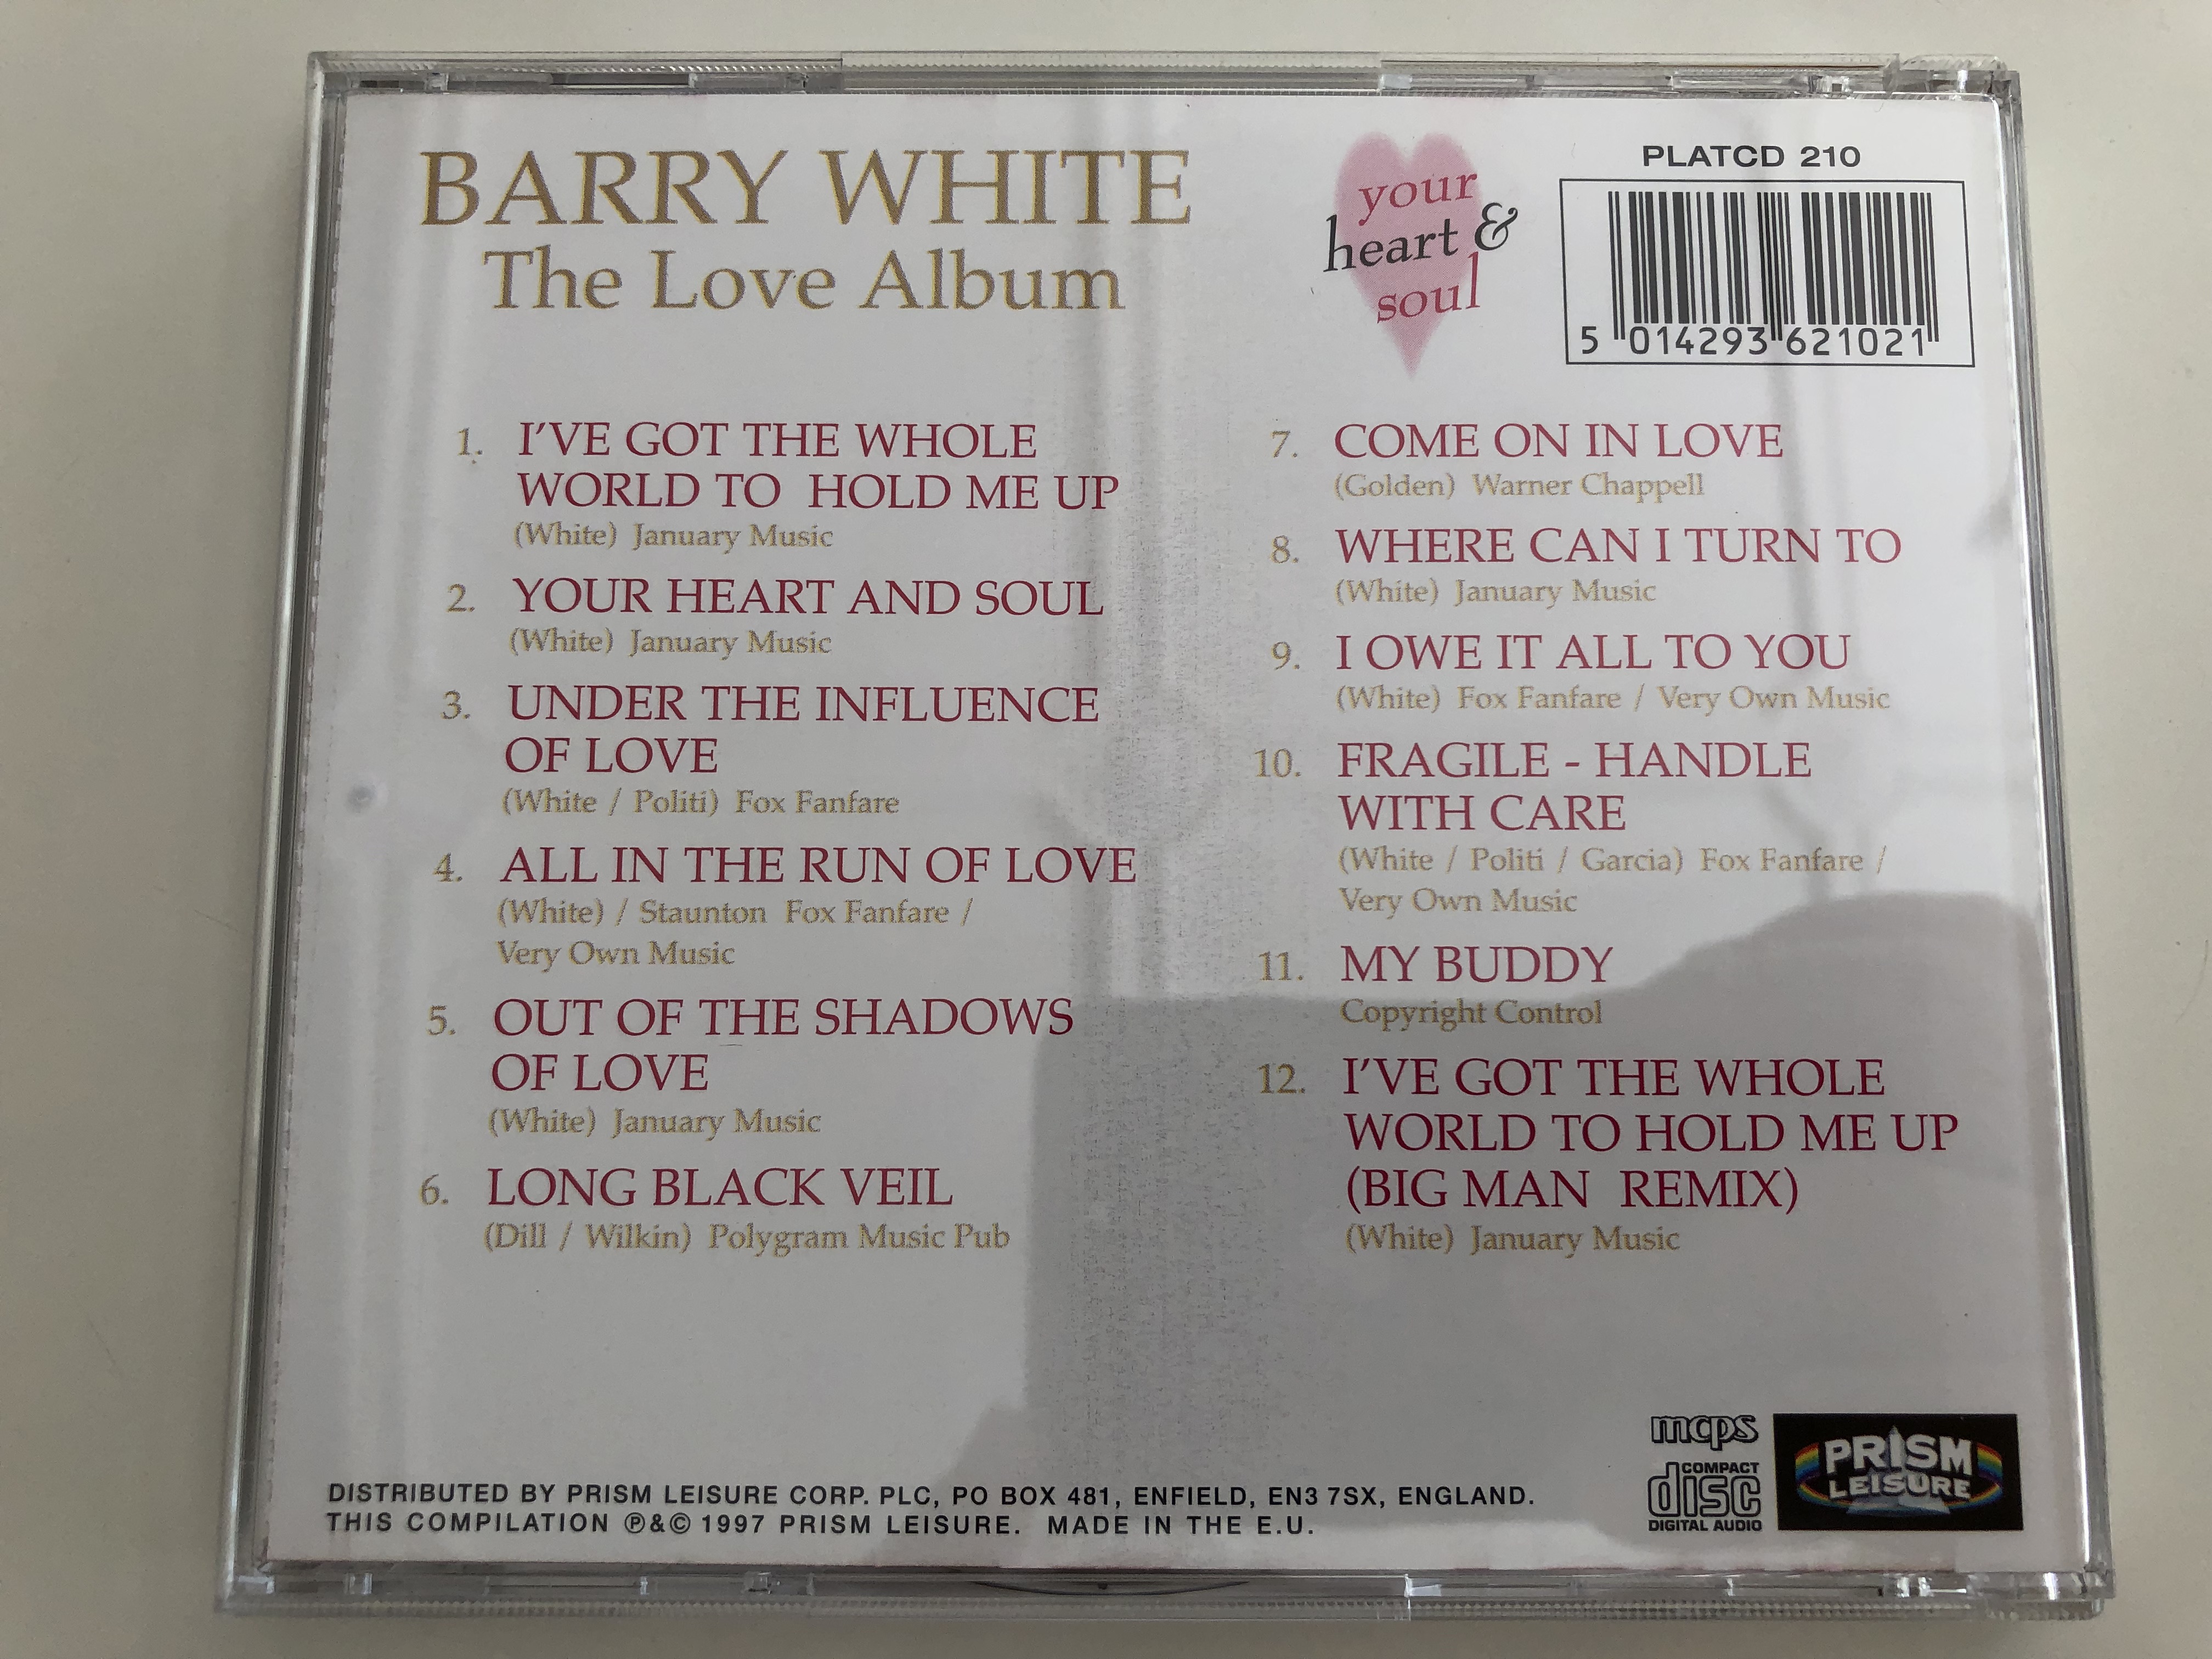 barry-white-your-heart-and-soul-the-love-album-audio-cd-1997-platcd-210-prism-leisure-4-.jpg